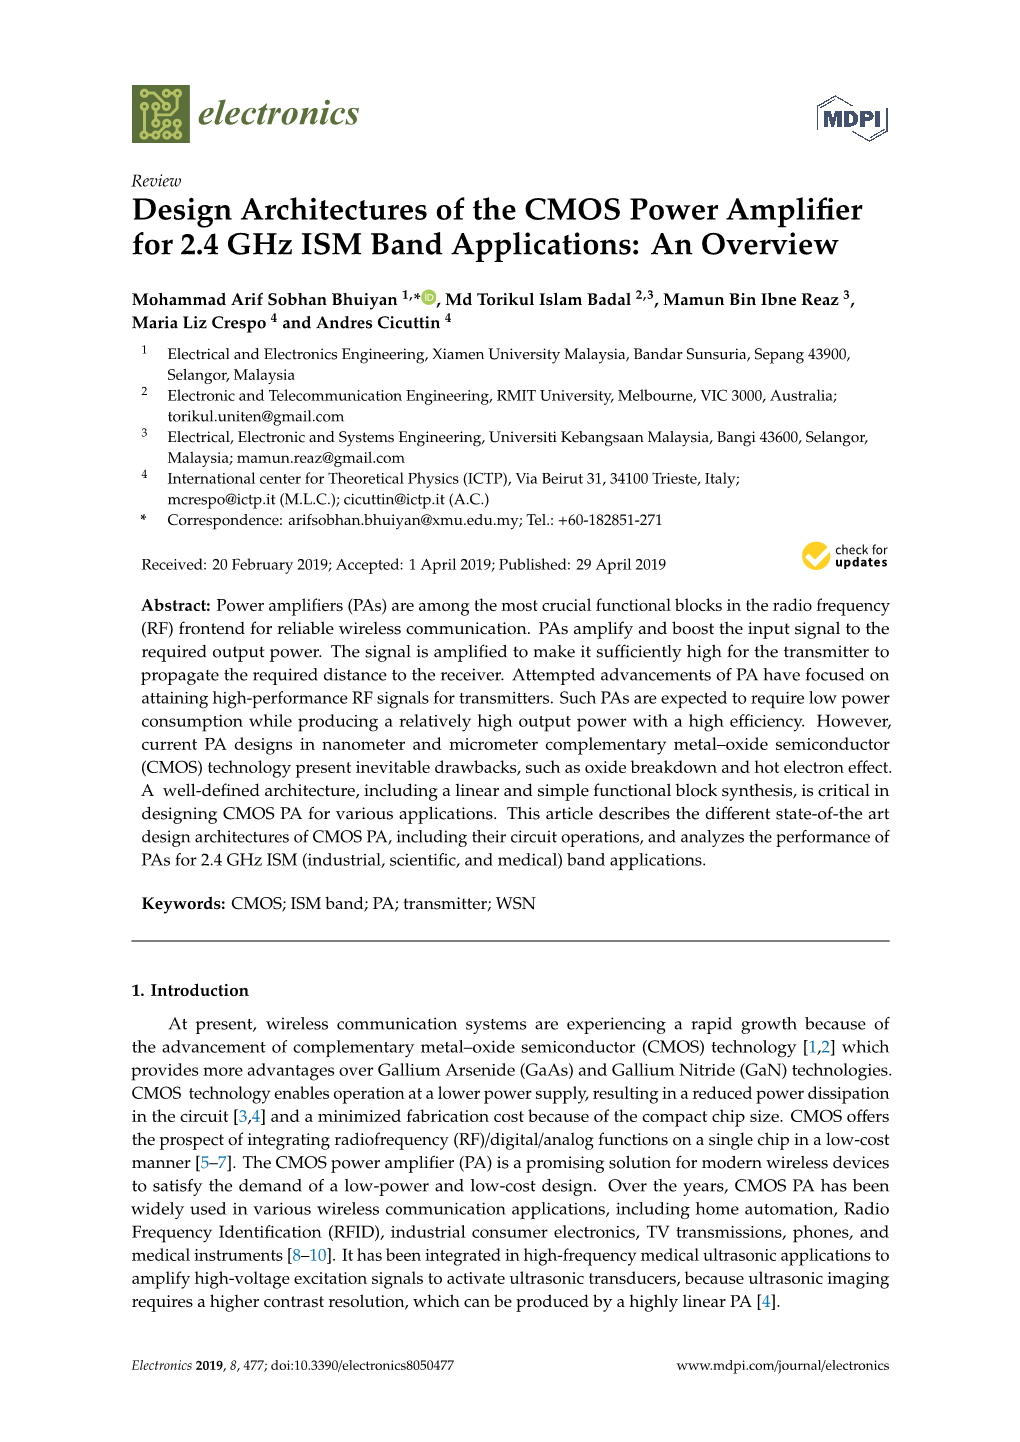 Design Architectures of the CMOS Power Amplifier for 2.4 Ghz